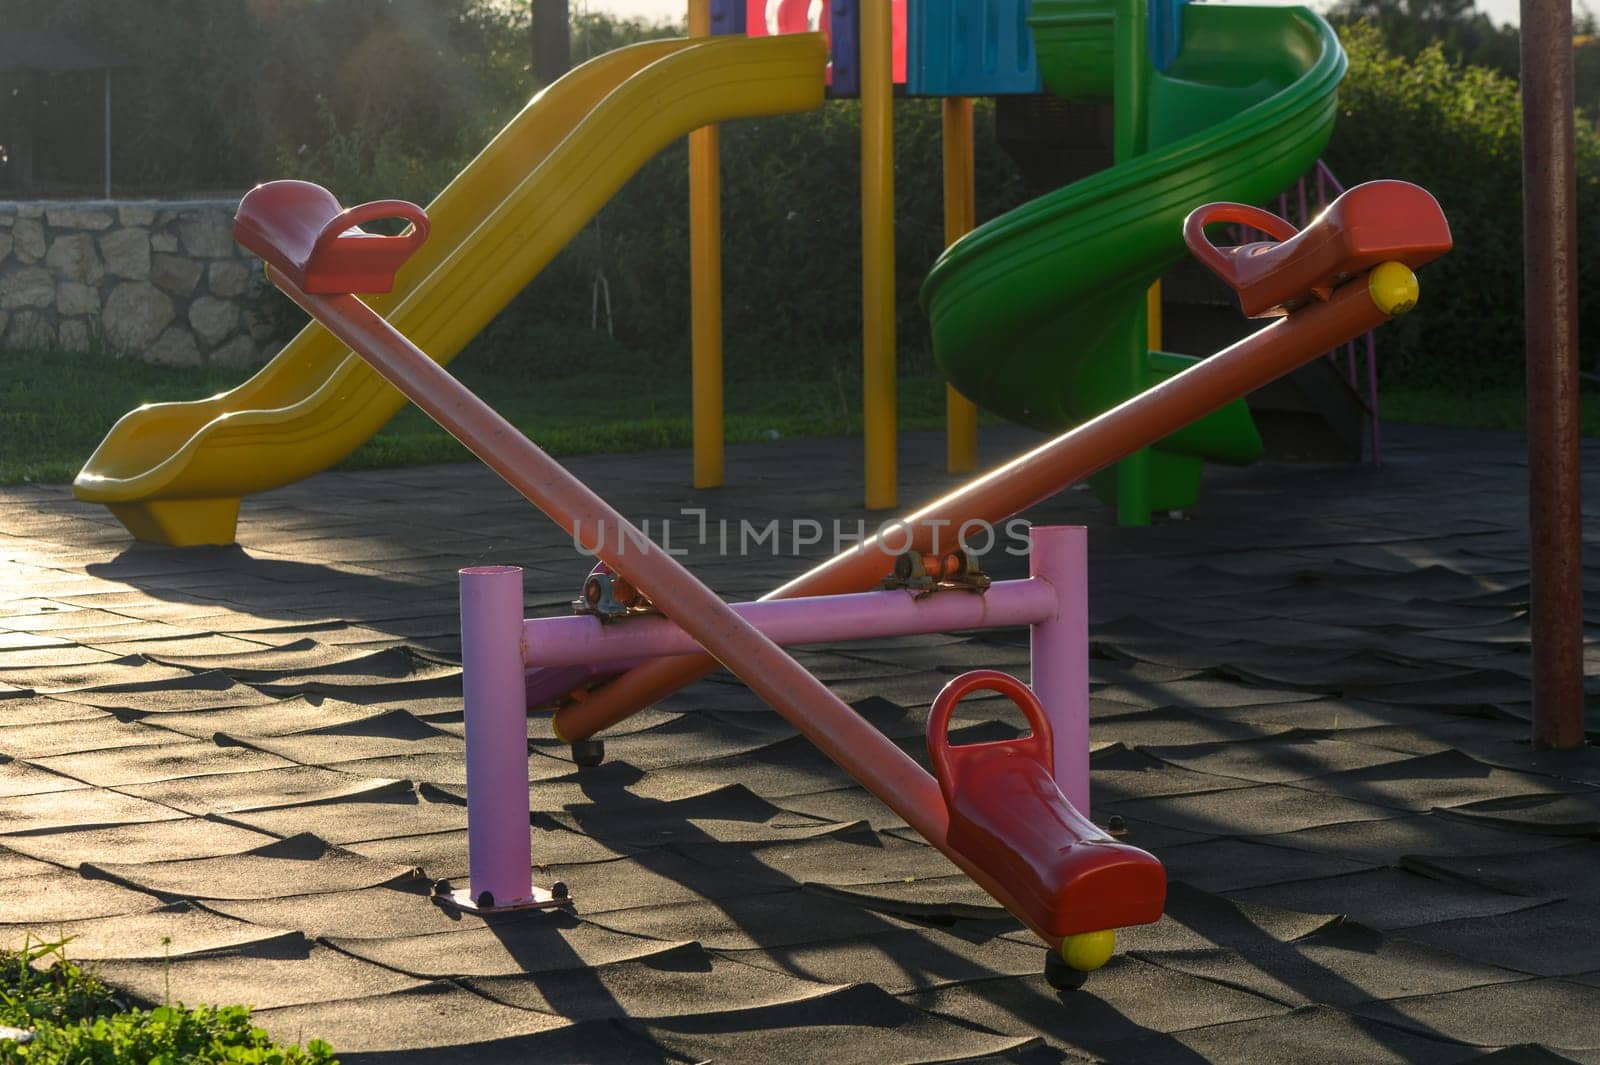 children's swings colorful on the playground in the village